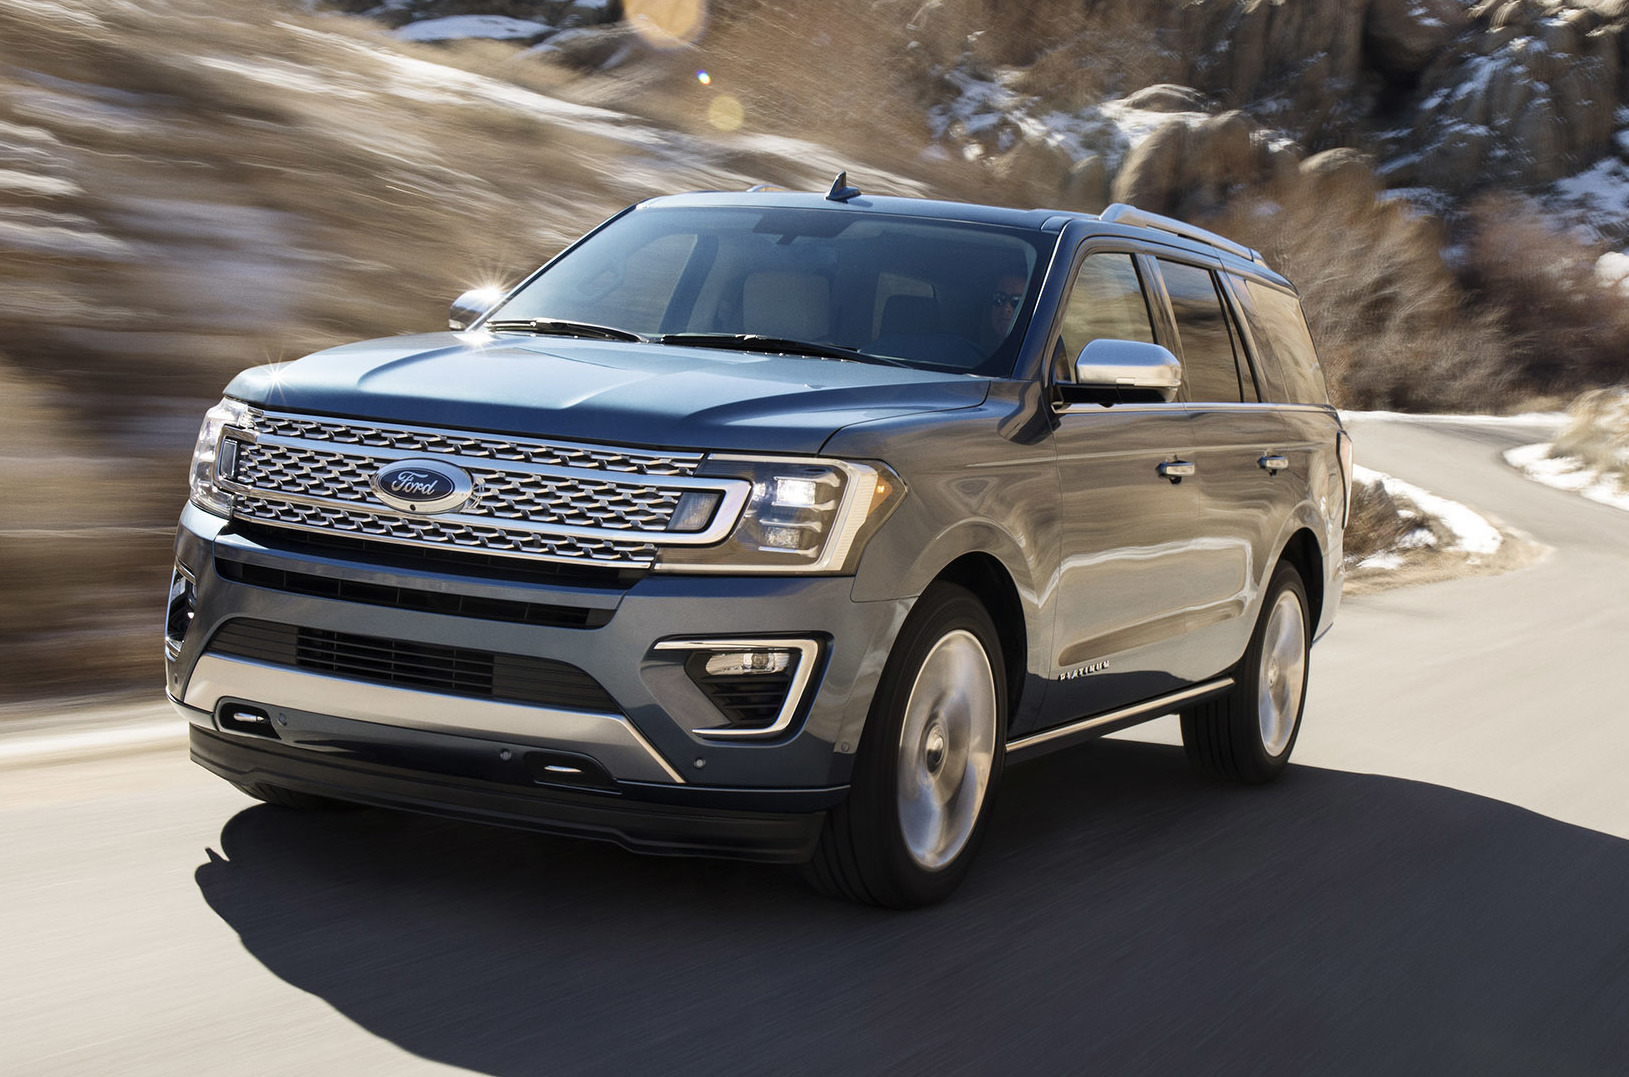 2018 Ford Expedition revealed, up to 136kg lighter